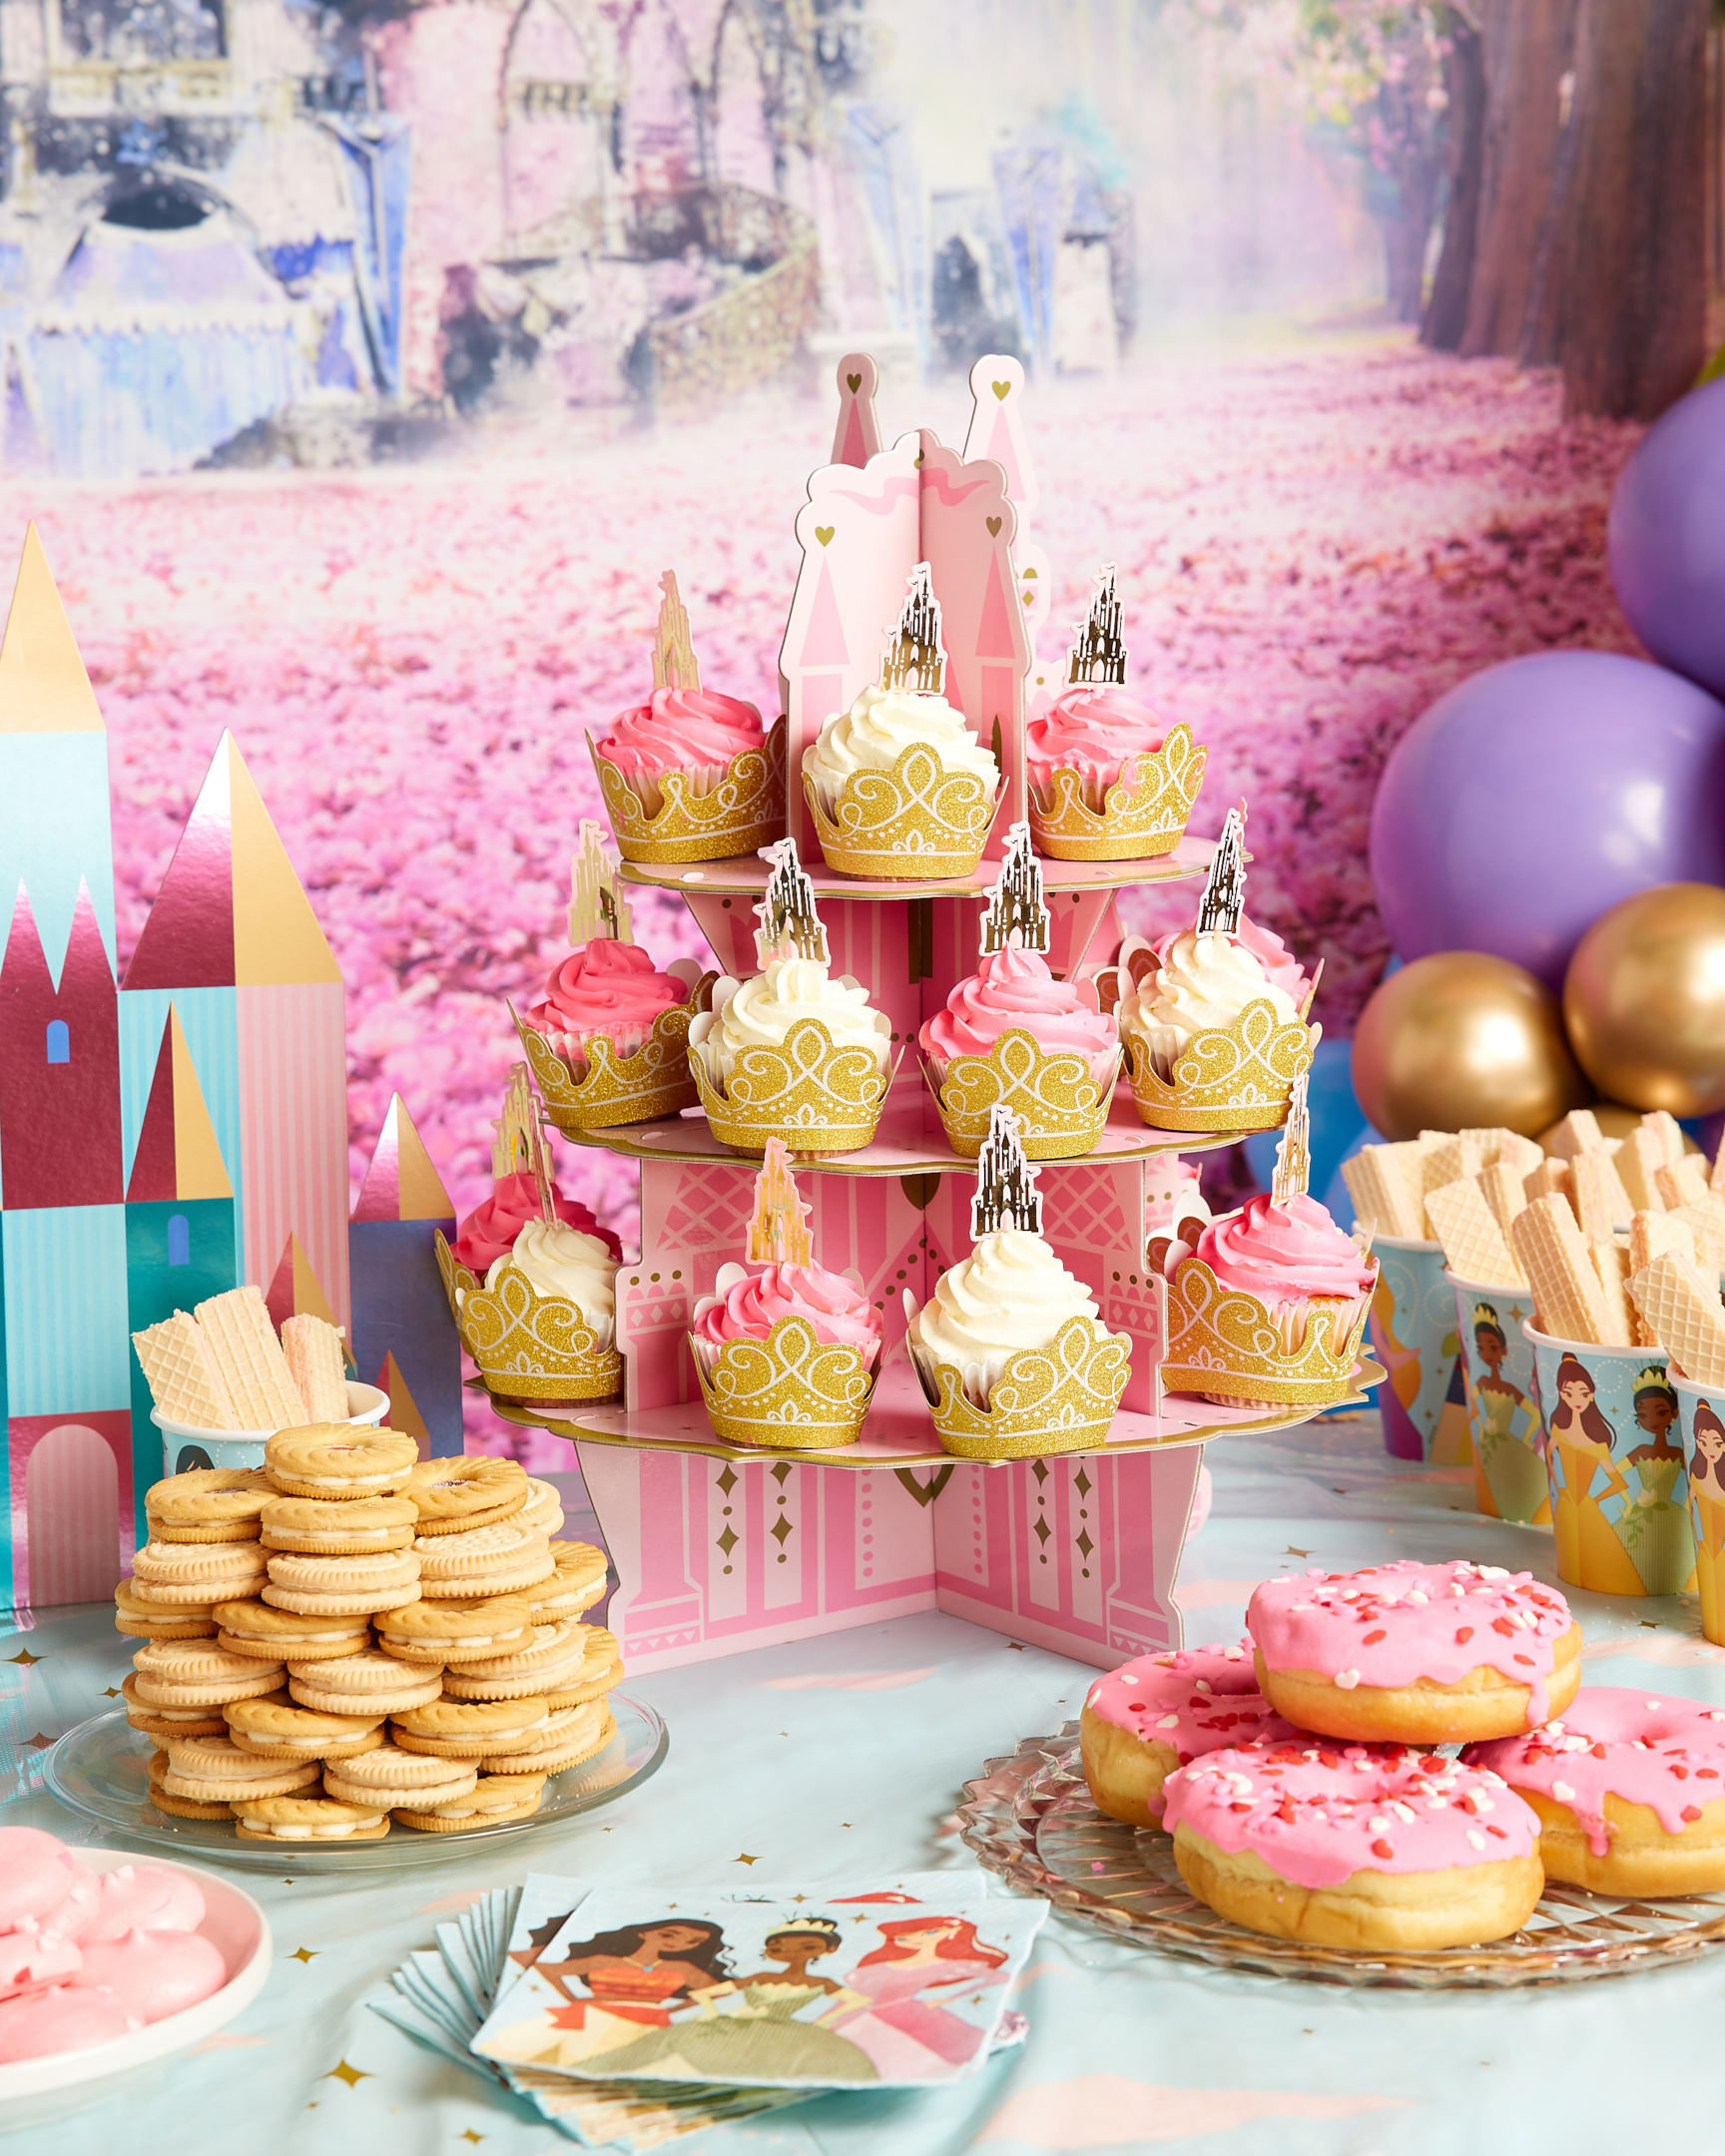 Disney Princess party supplies and tableware, table decorations.